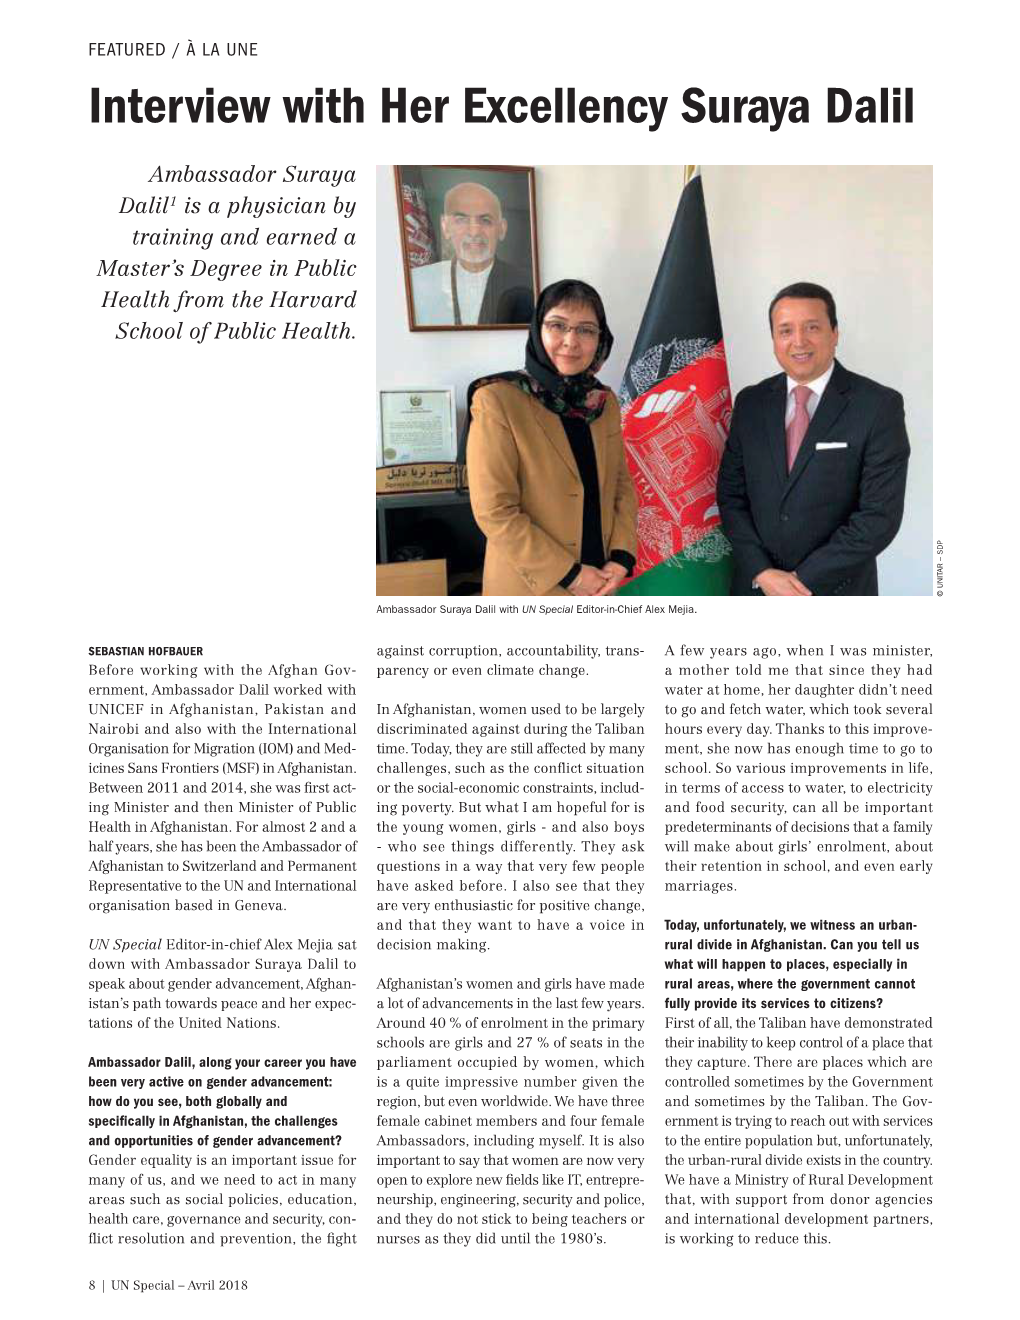 Interview with Her Excellency Suraya Dalil